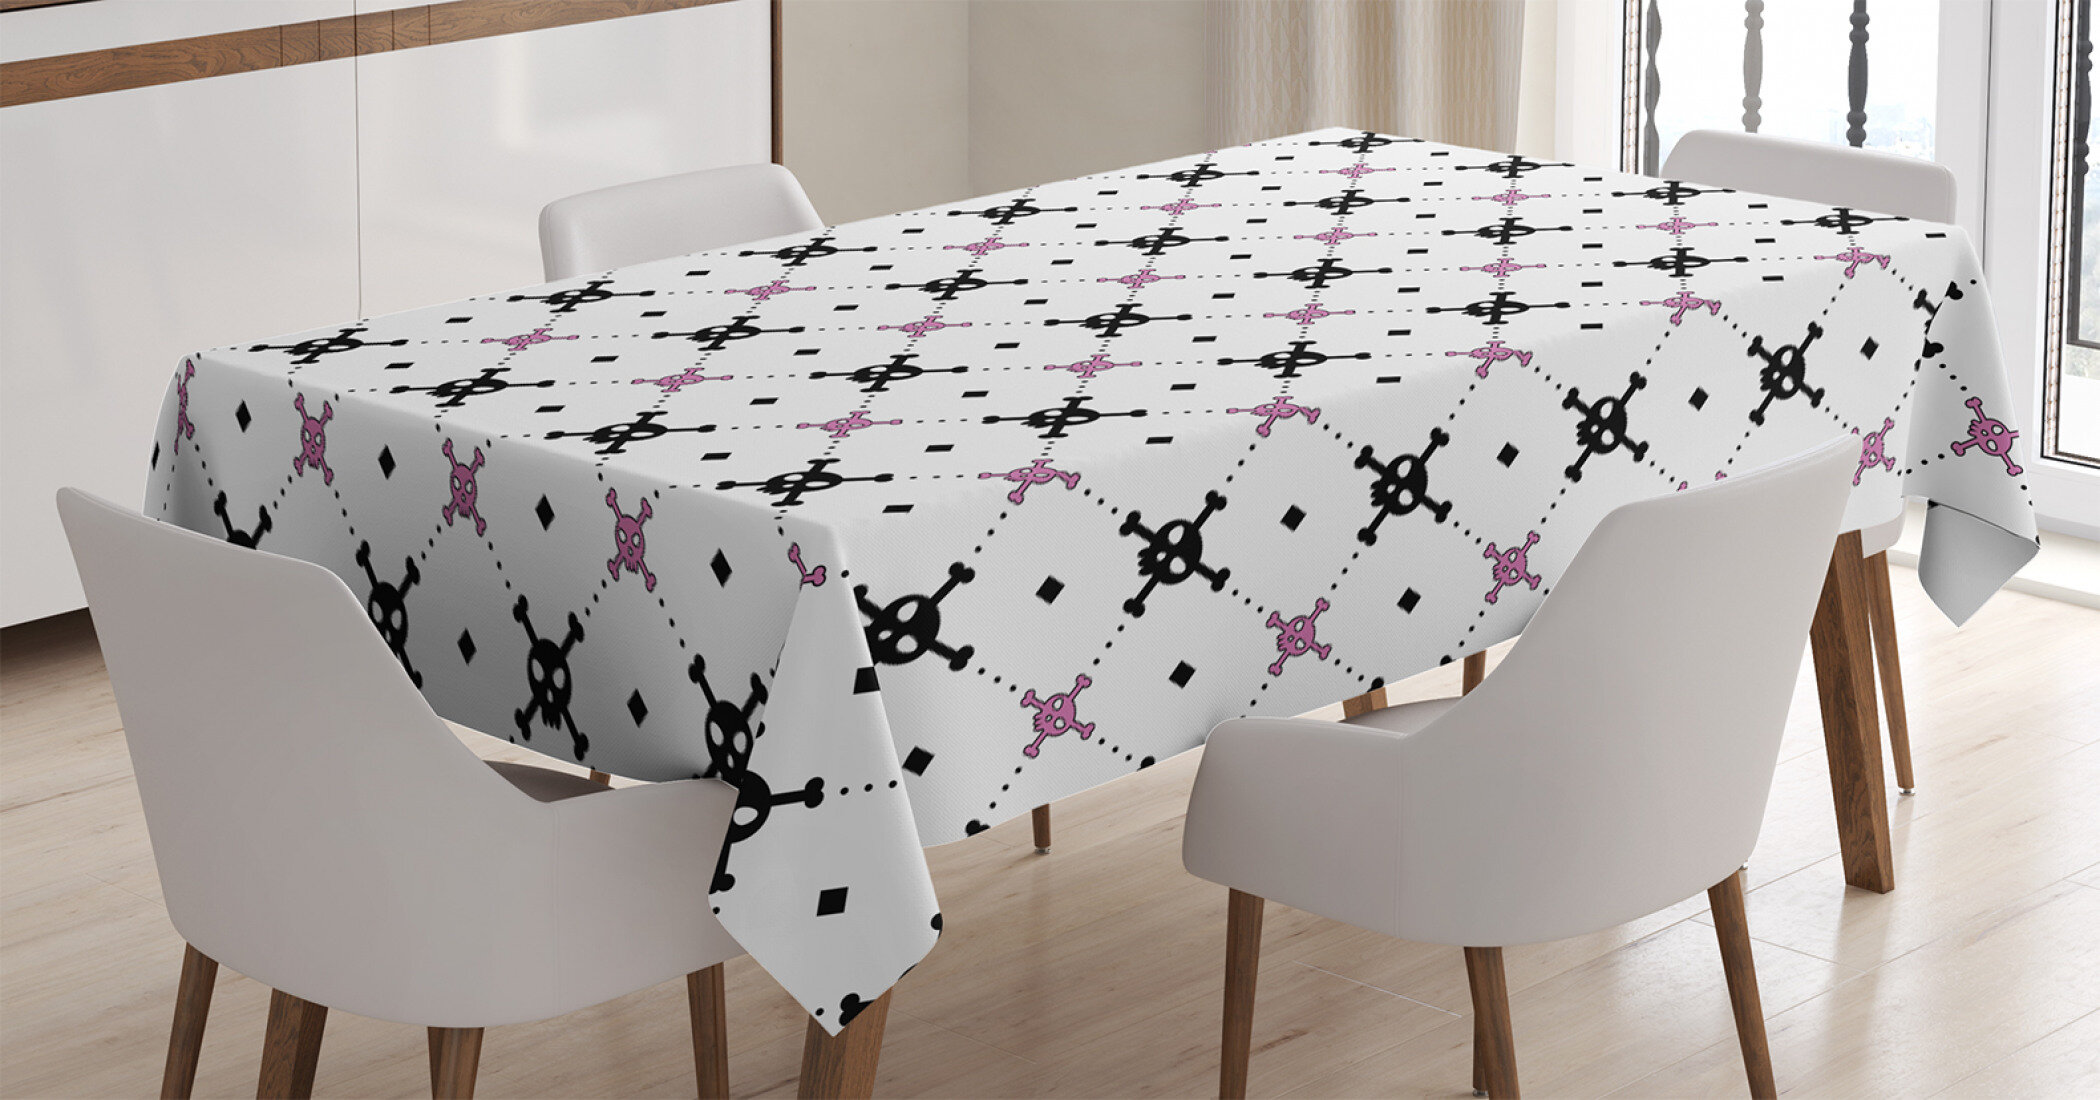 Ambesonne Checkered Tablecloth Table Cover for Dining Room Kitchen